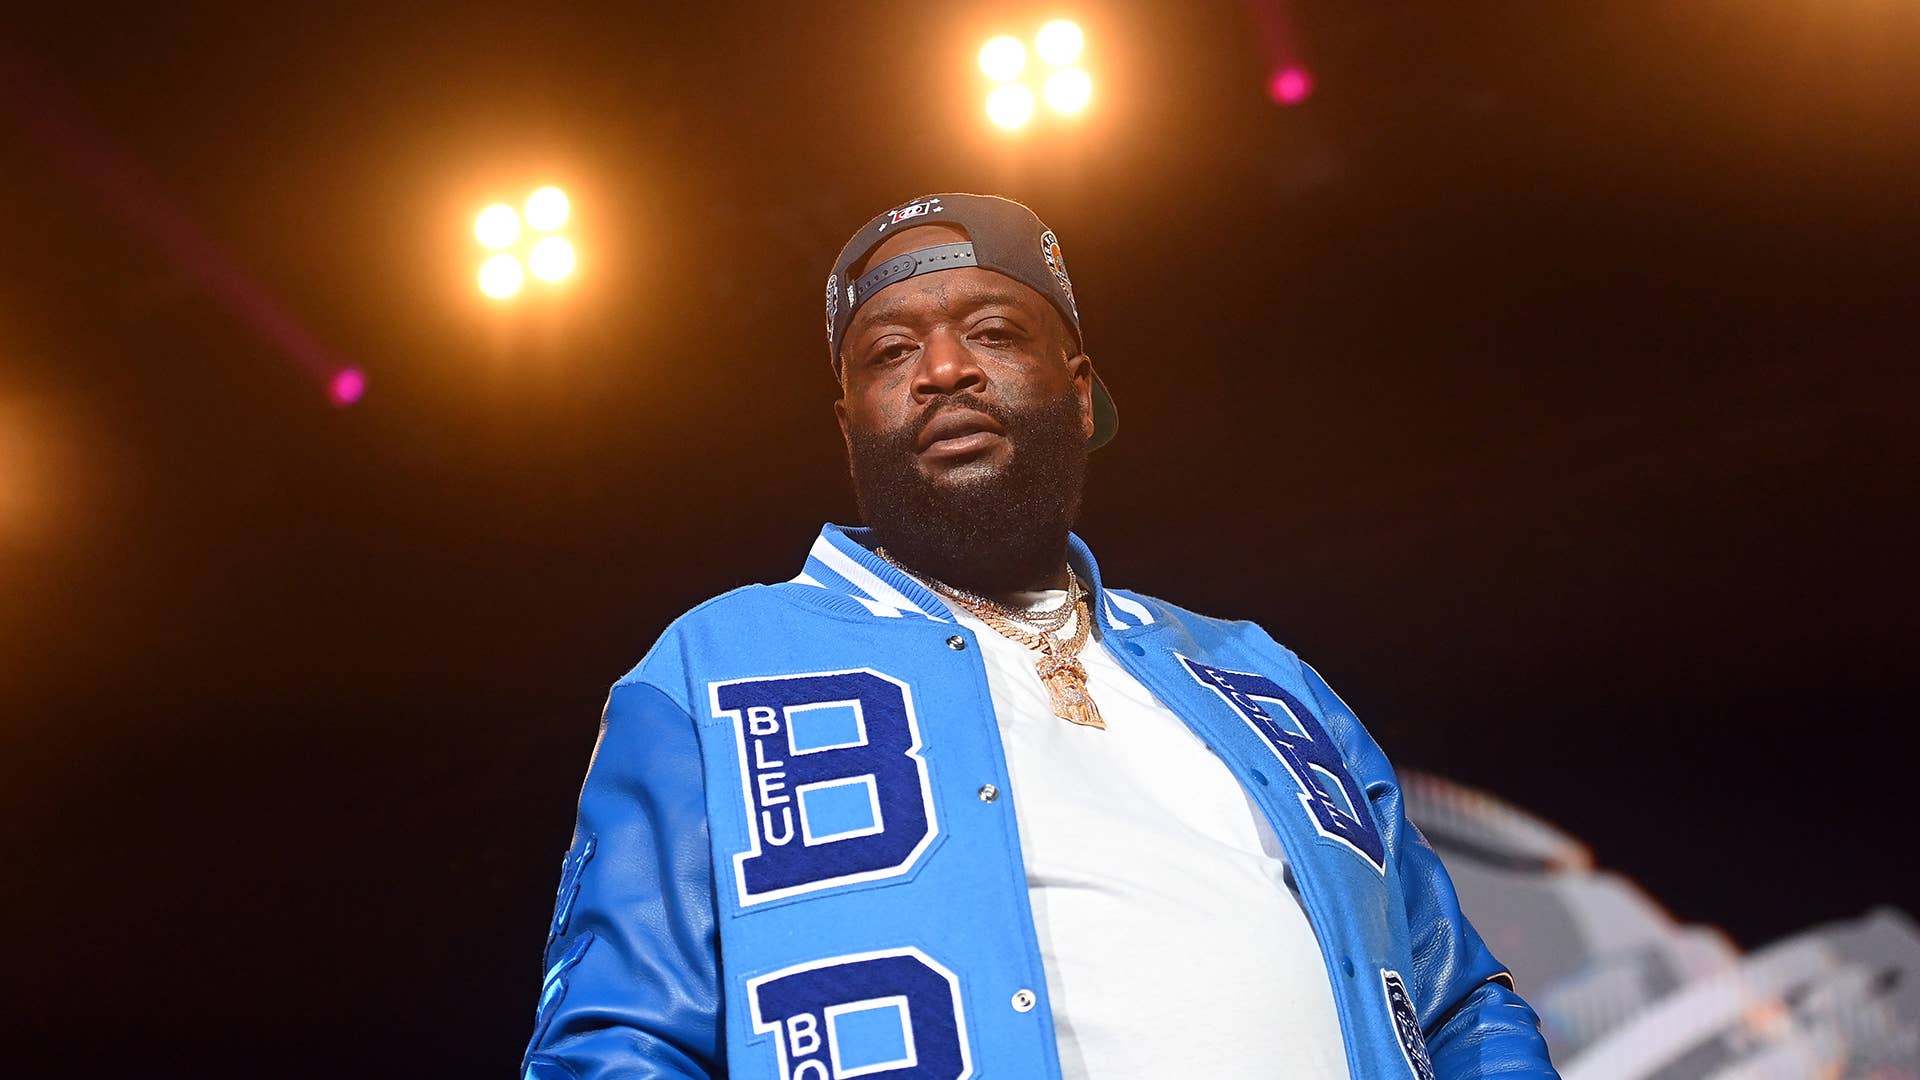 Rapper Rick Ross performs onstage during "Legendz Of The Streetz" tour